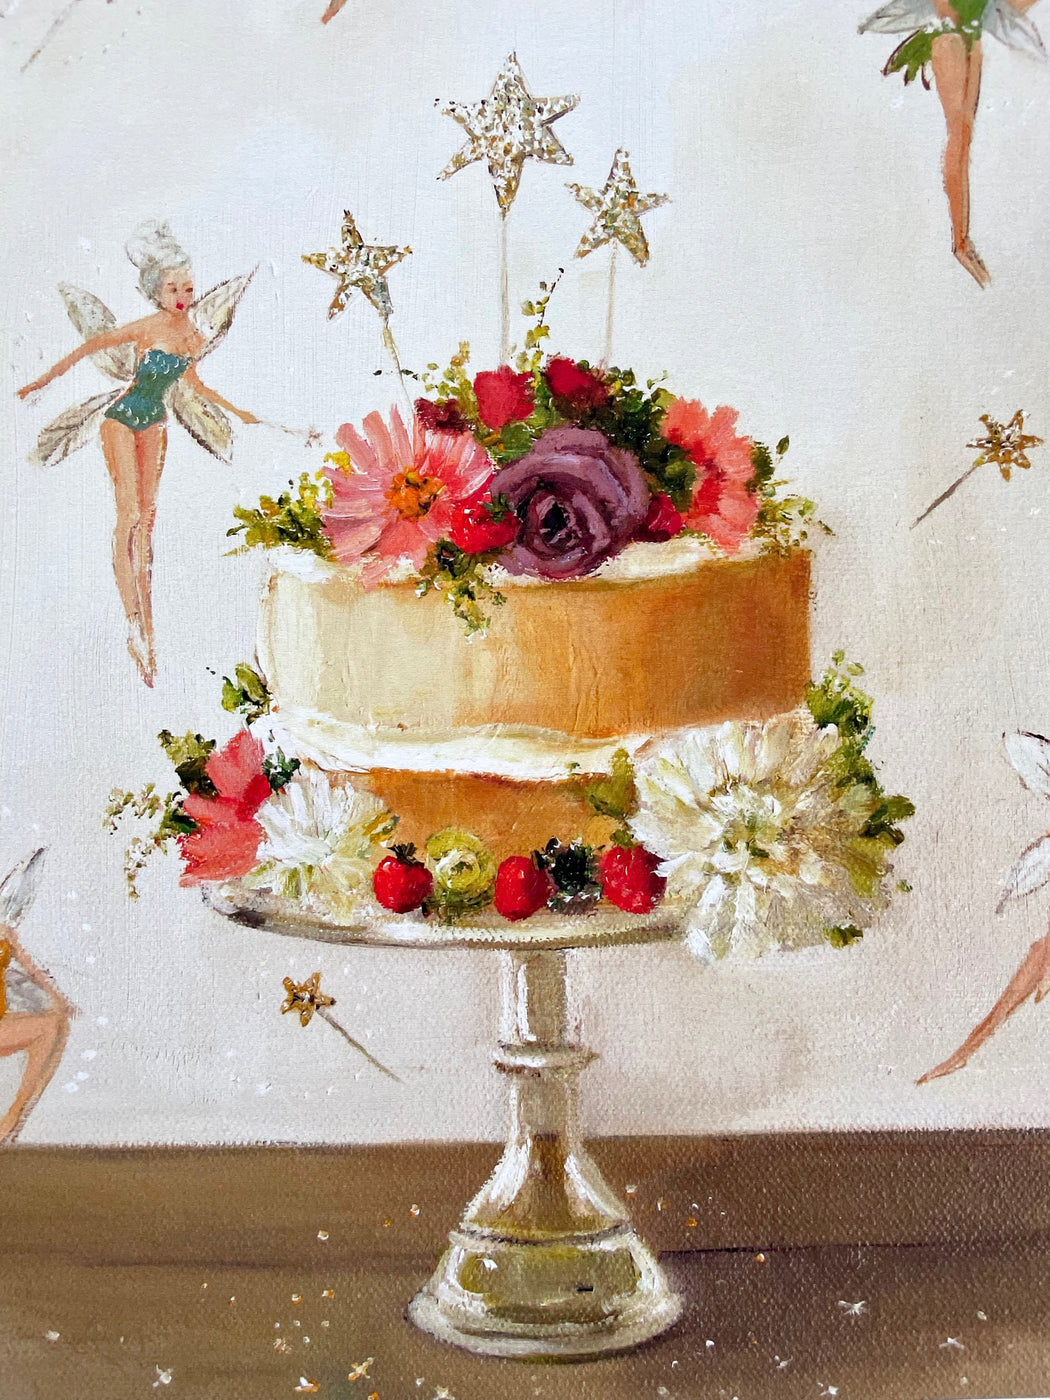 "Fairy Cake" by Janet Hill